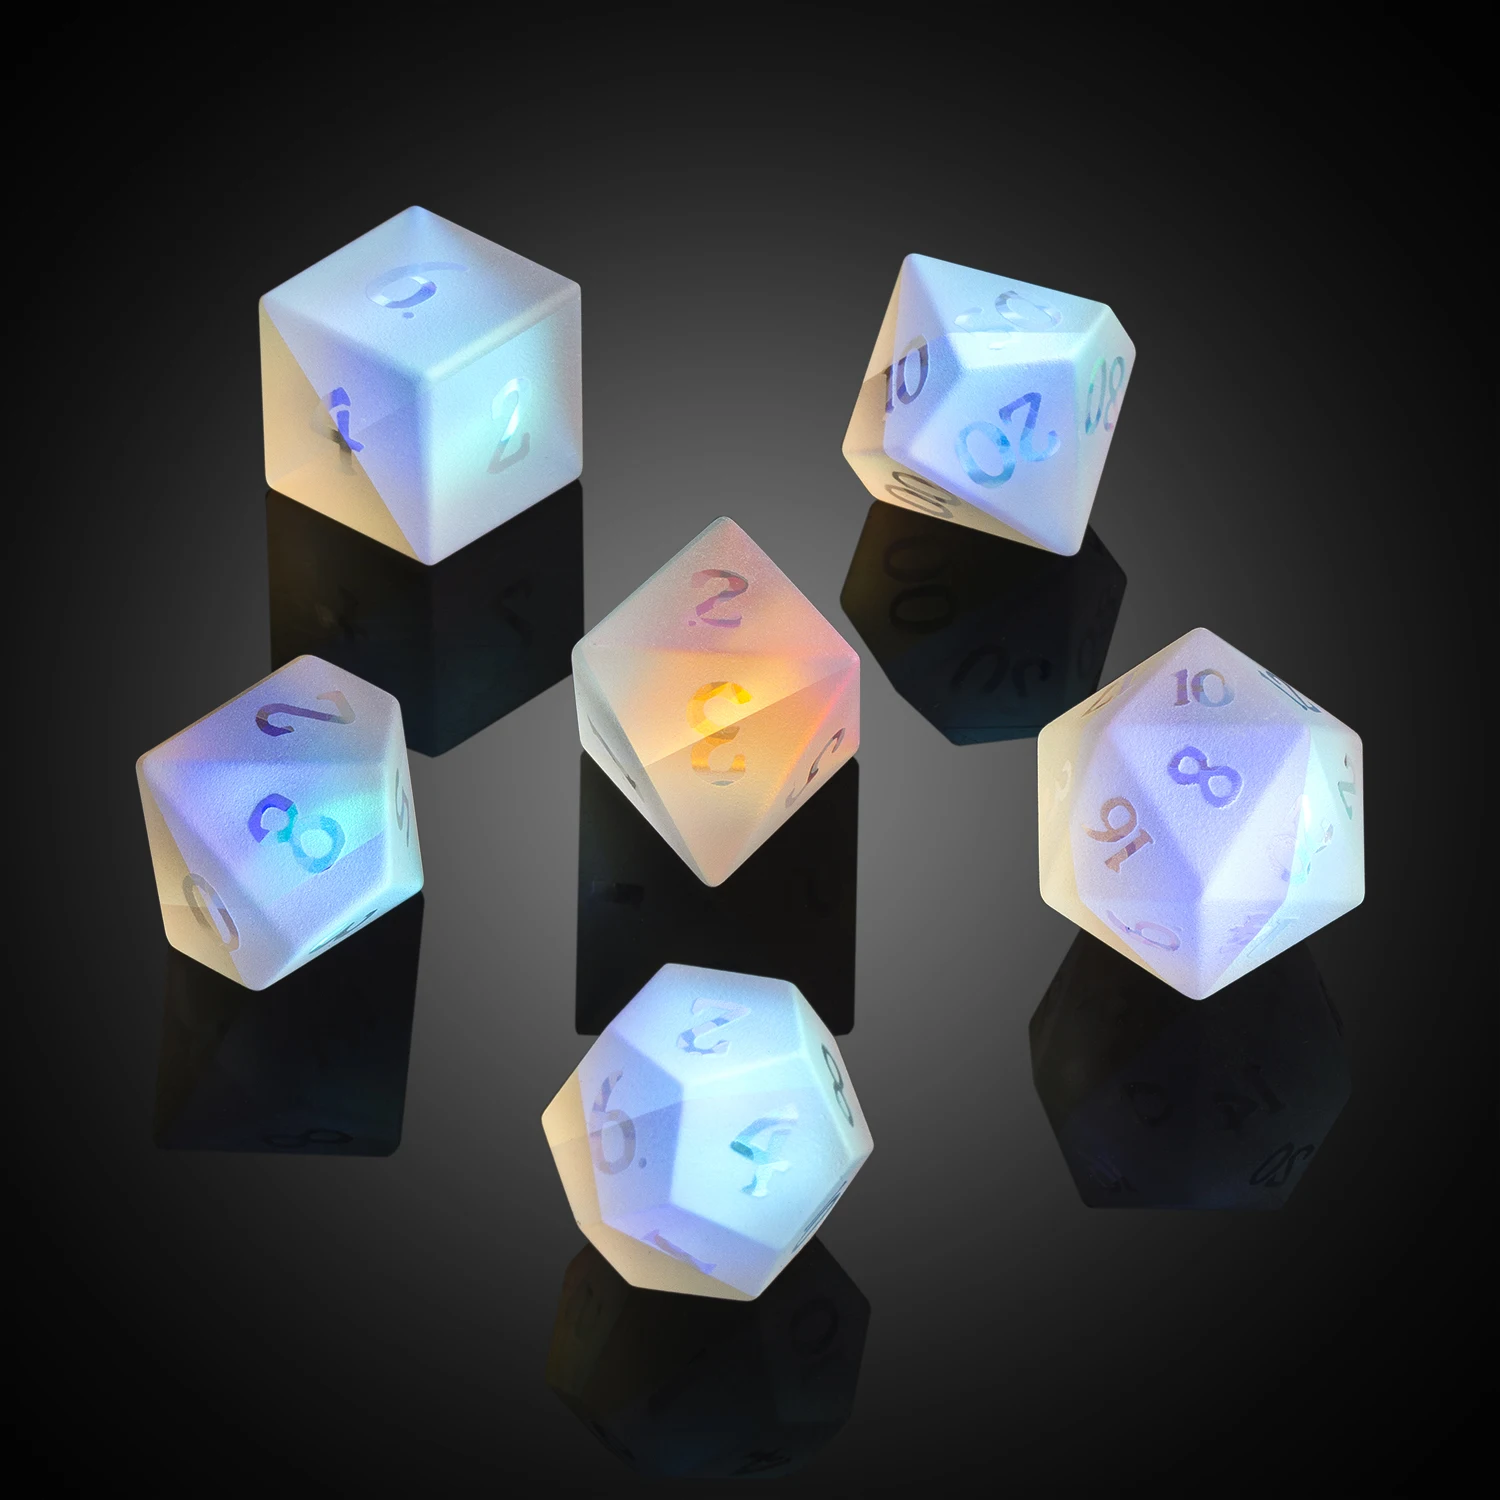 

Wholesale Engraved Gemstone Dice Custom Rainbow Prism Glass DND Gem Dice Stone Polyhedral Dice Set K9 Frosted Colorful Glass D20